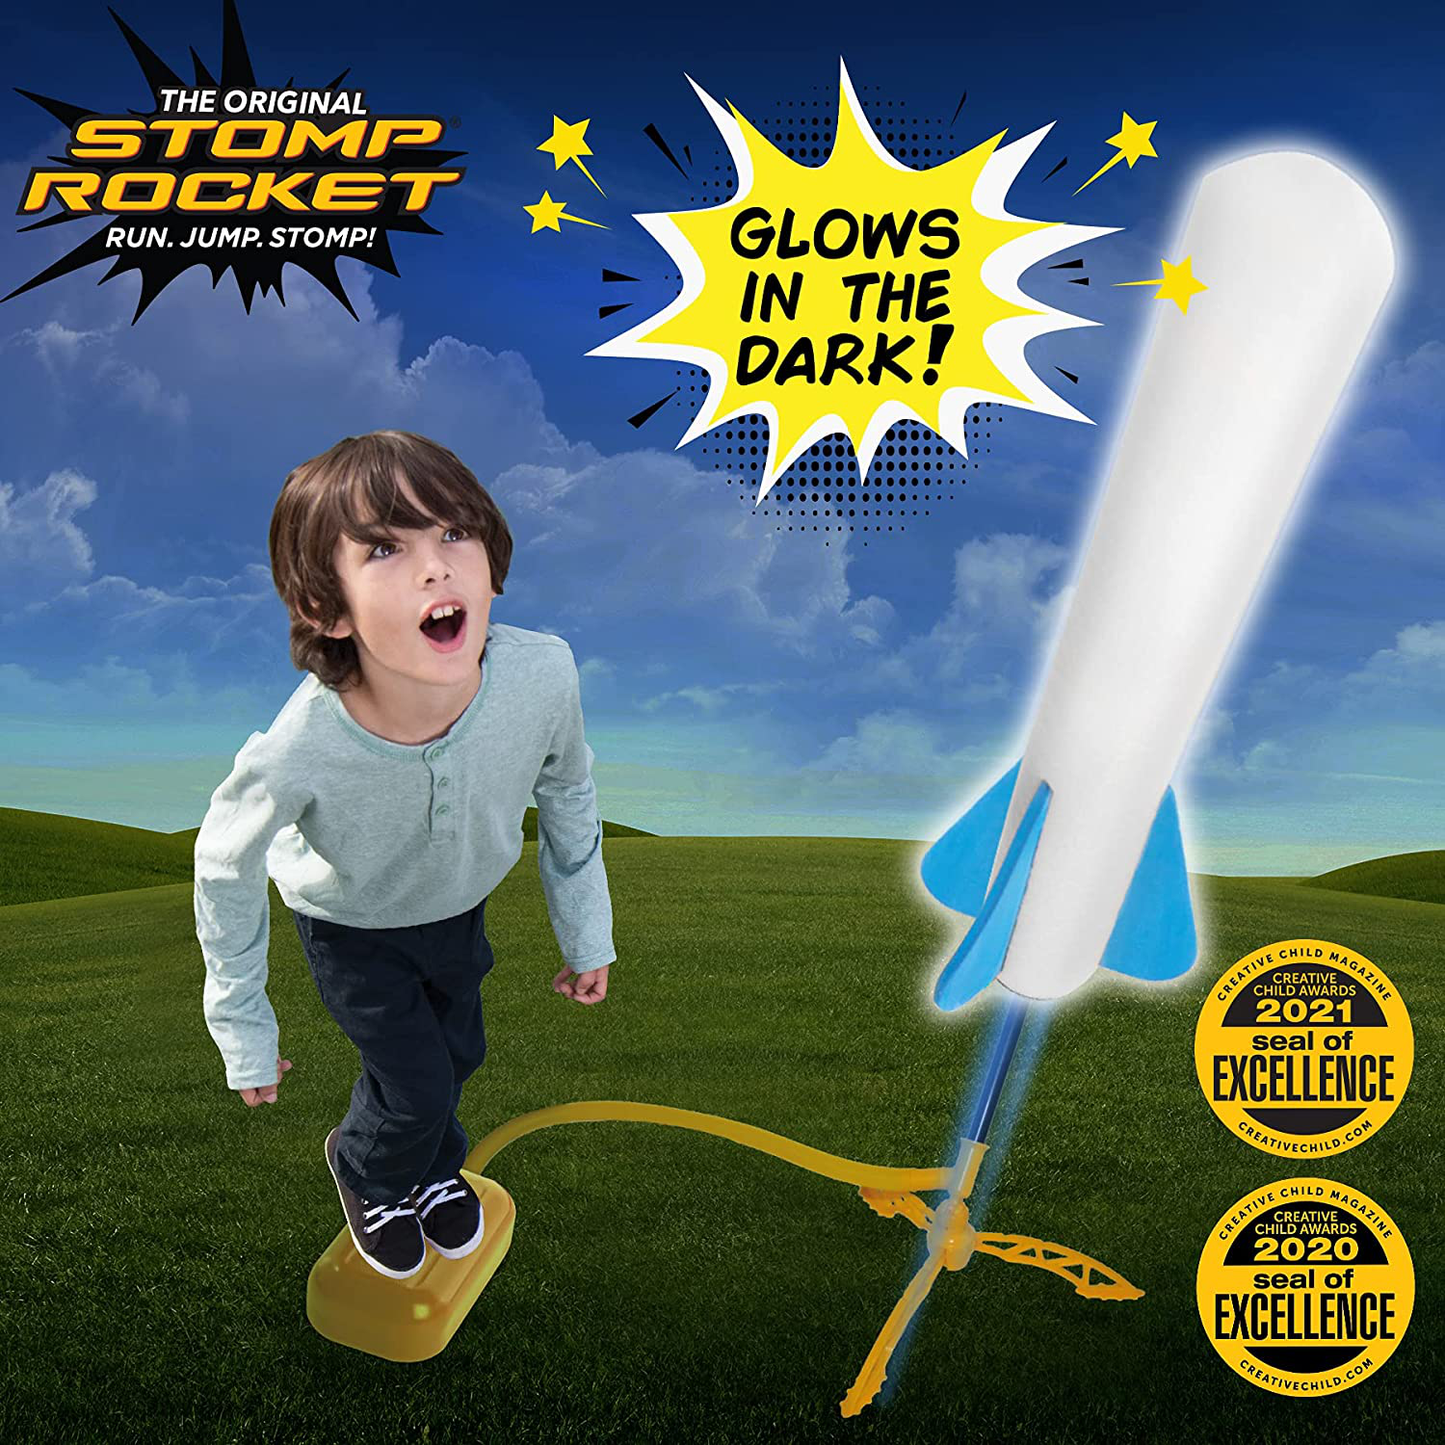 Stomp Rocket The Original Jr. Glow Rocket Launcher, 4 Foam Rockets and Toy Air Rocket Launcher - Glows in The Dark, STEM Gift for Boys and Girls Ages 3 Years and Up - Great for Year Round Play